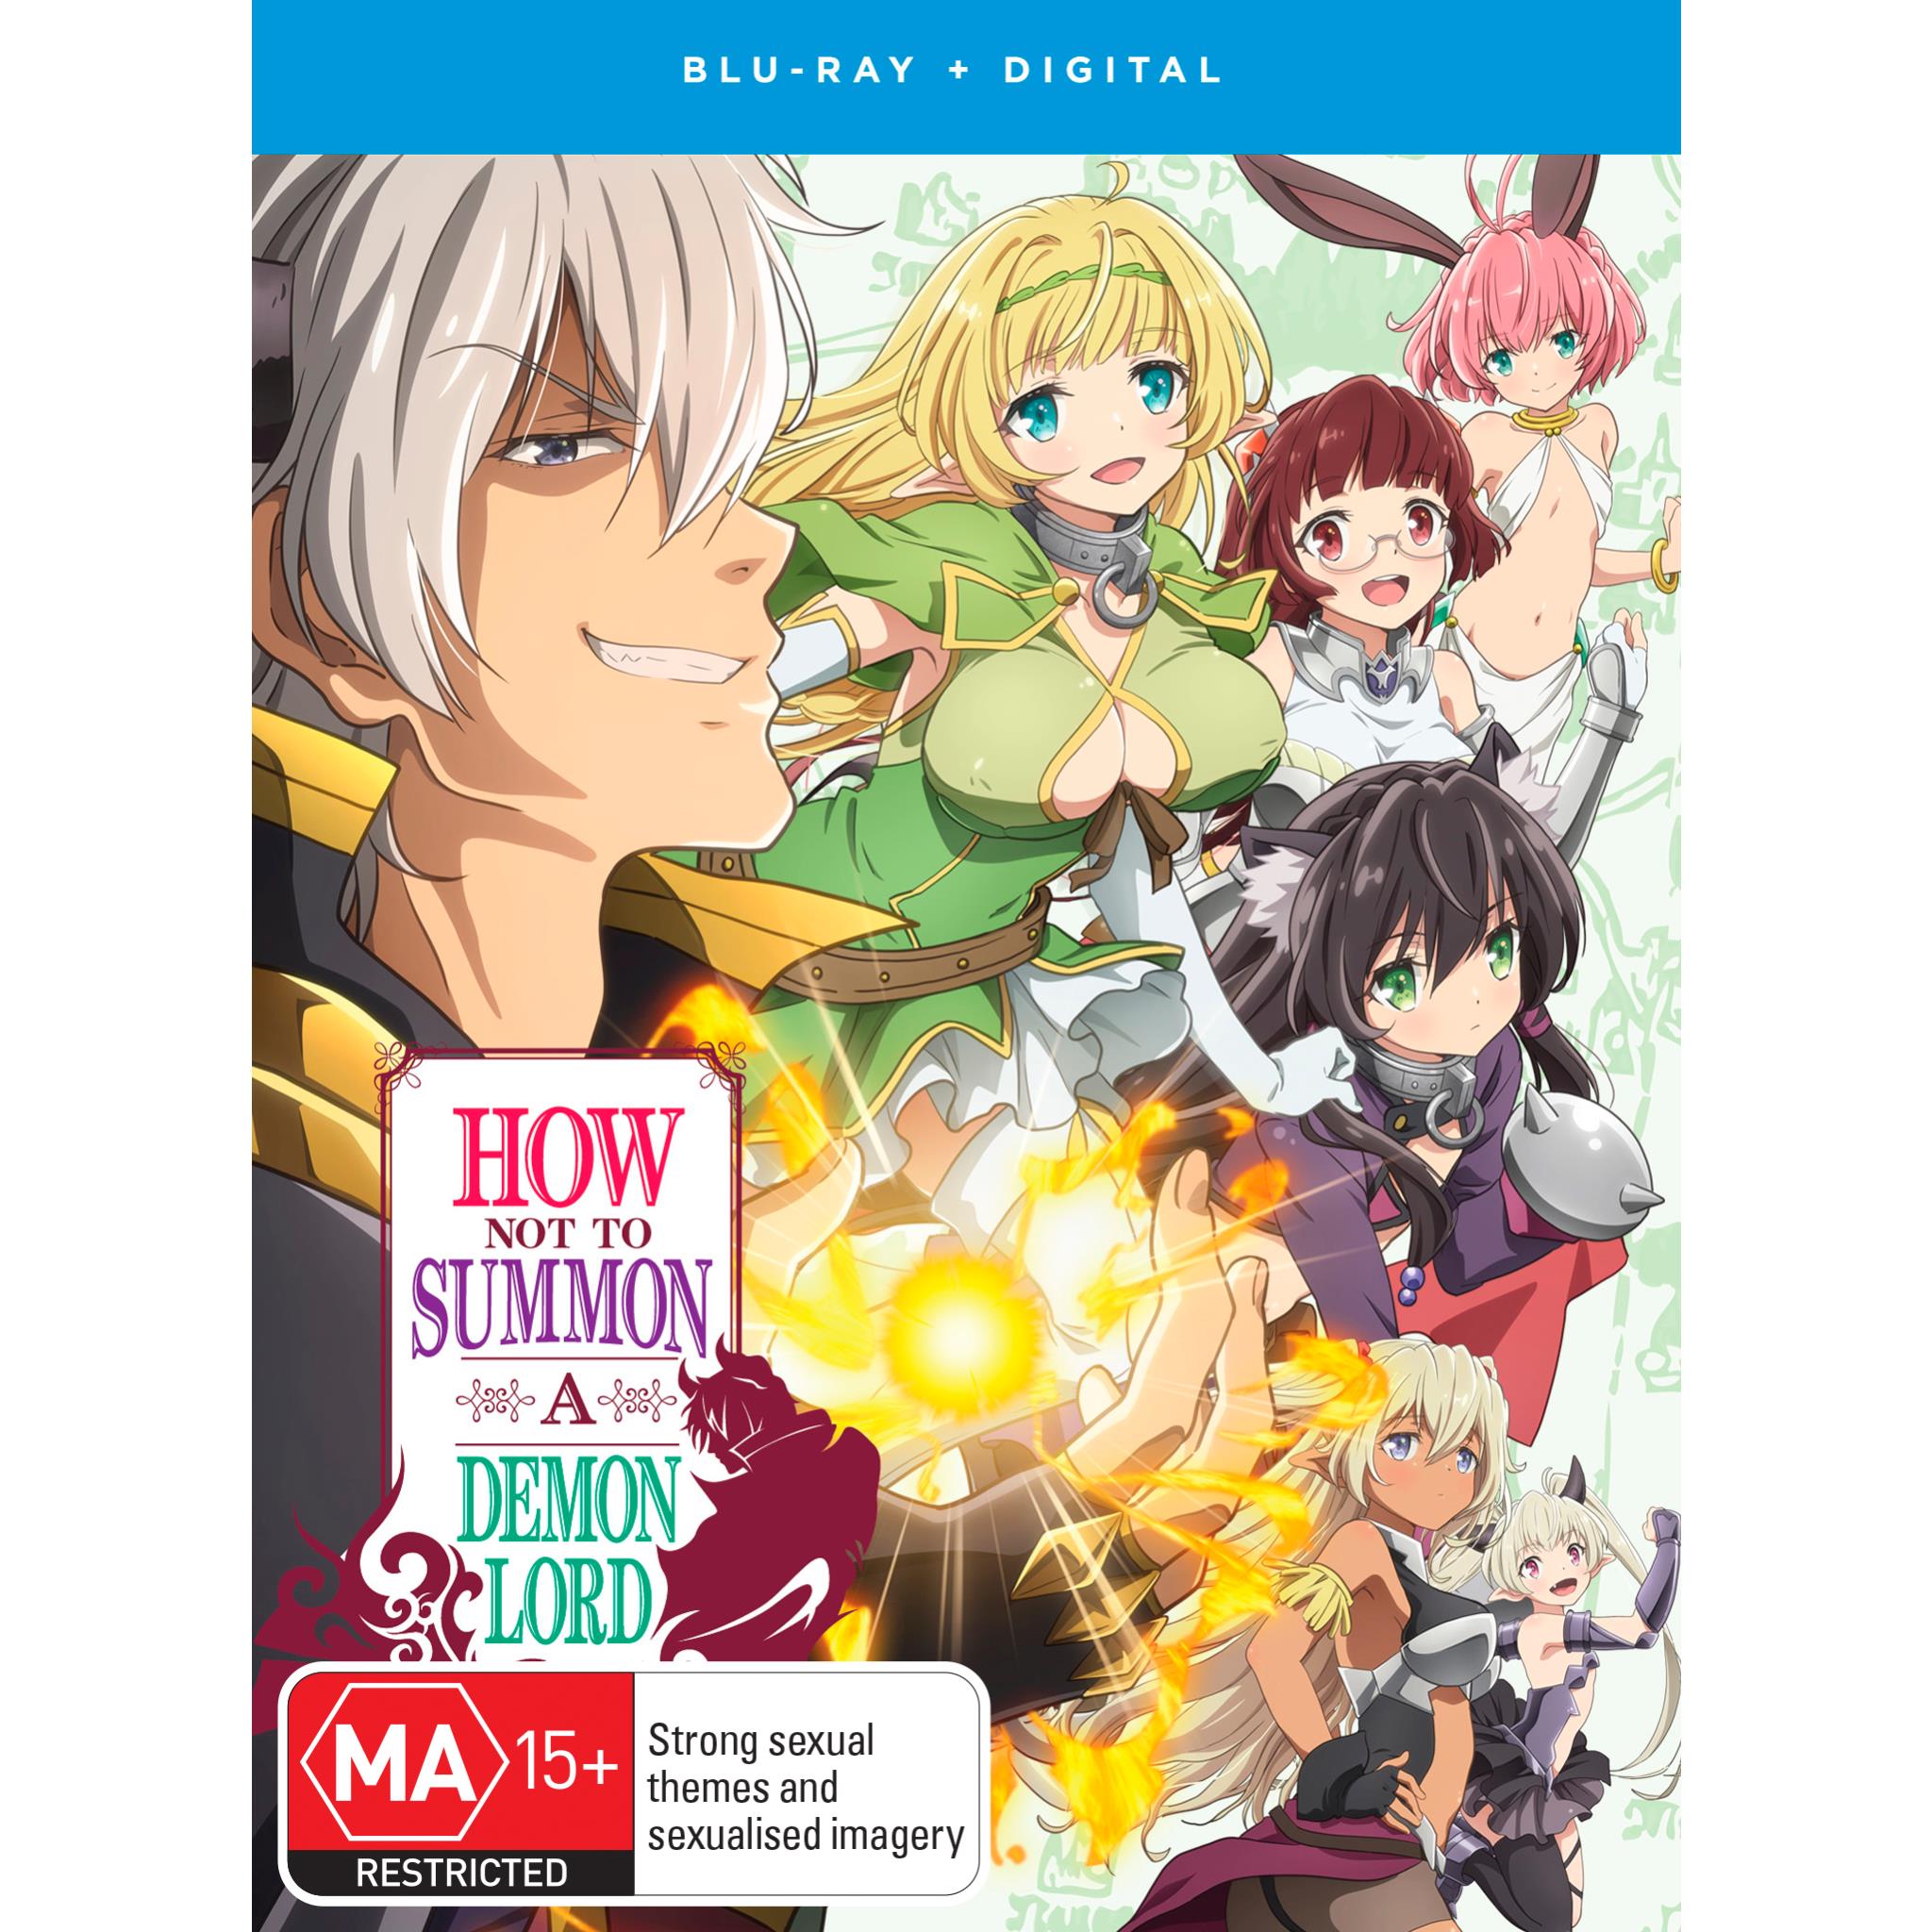 how not to summon a demon lord - complete series